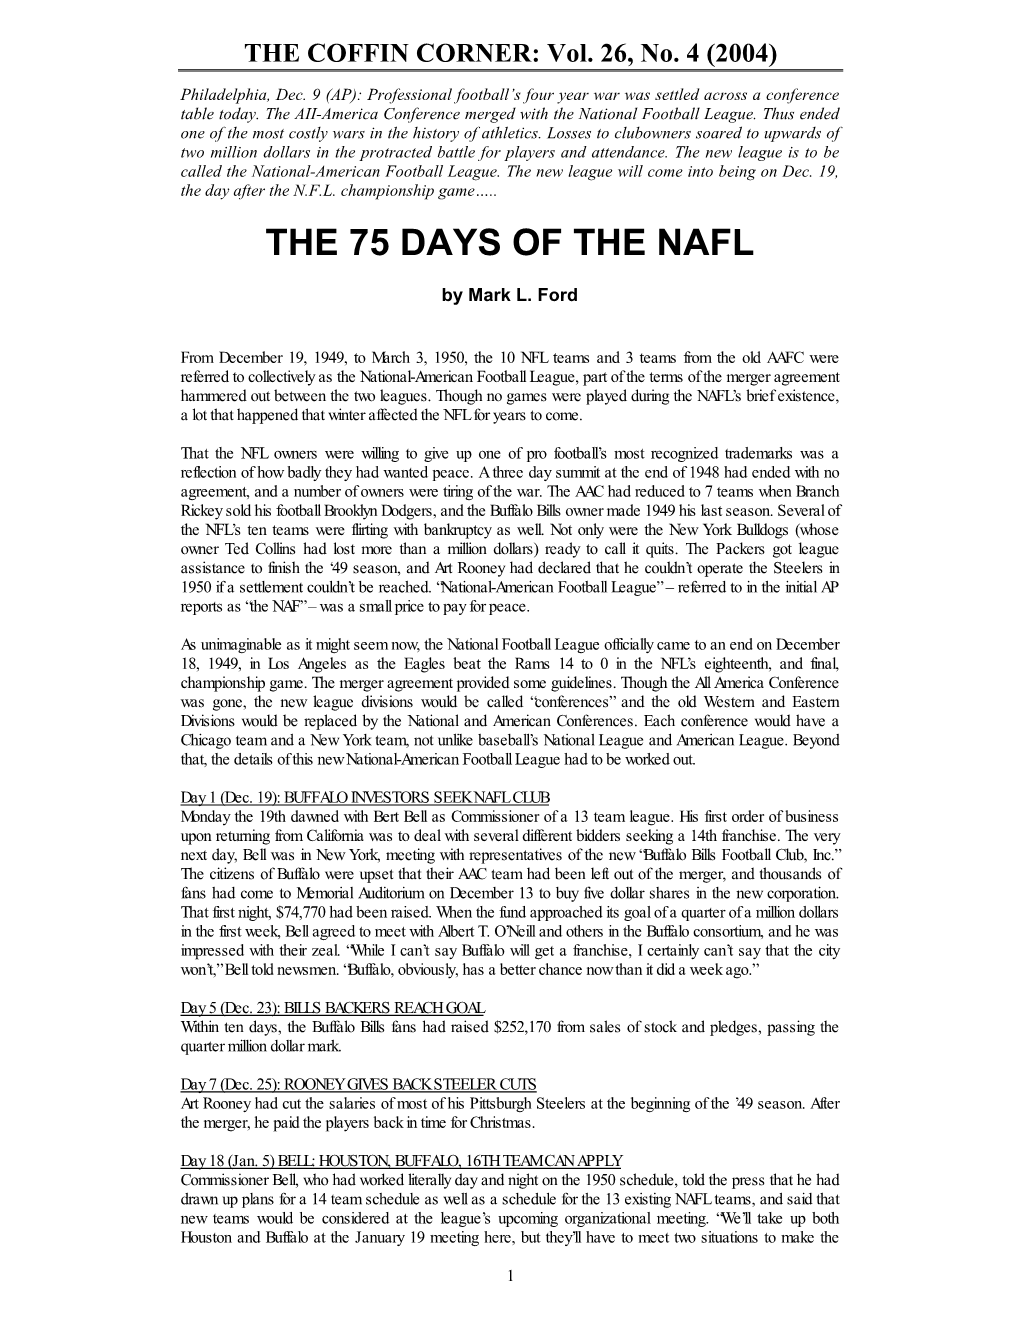 The 75 Days of the Nafl